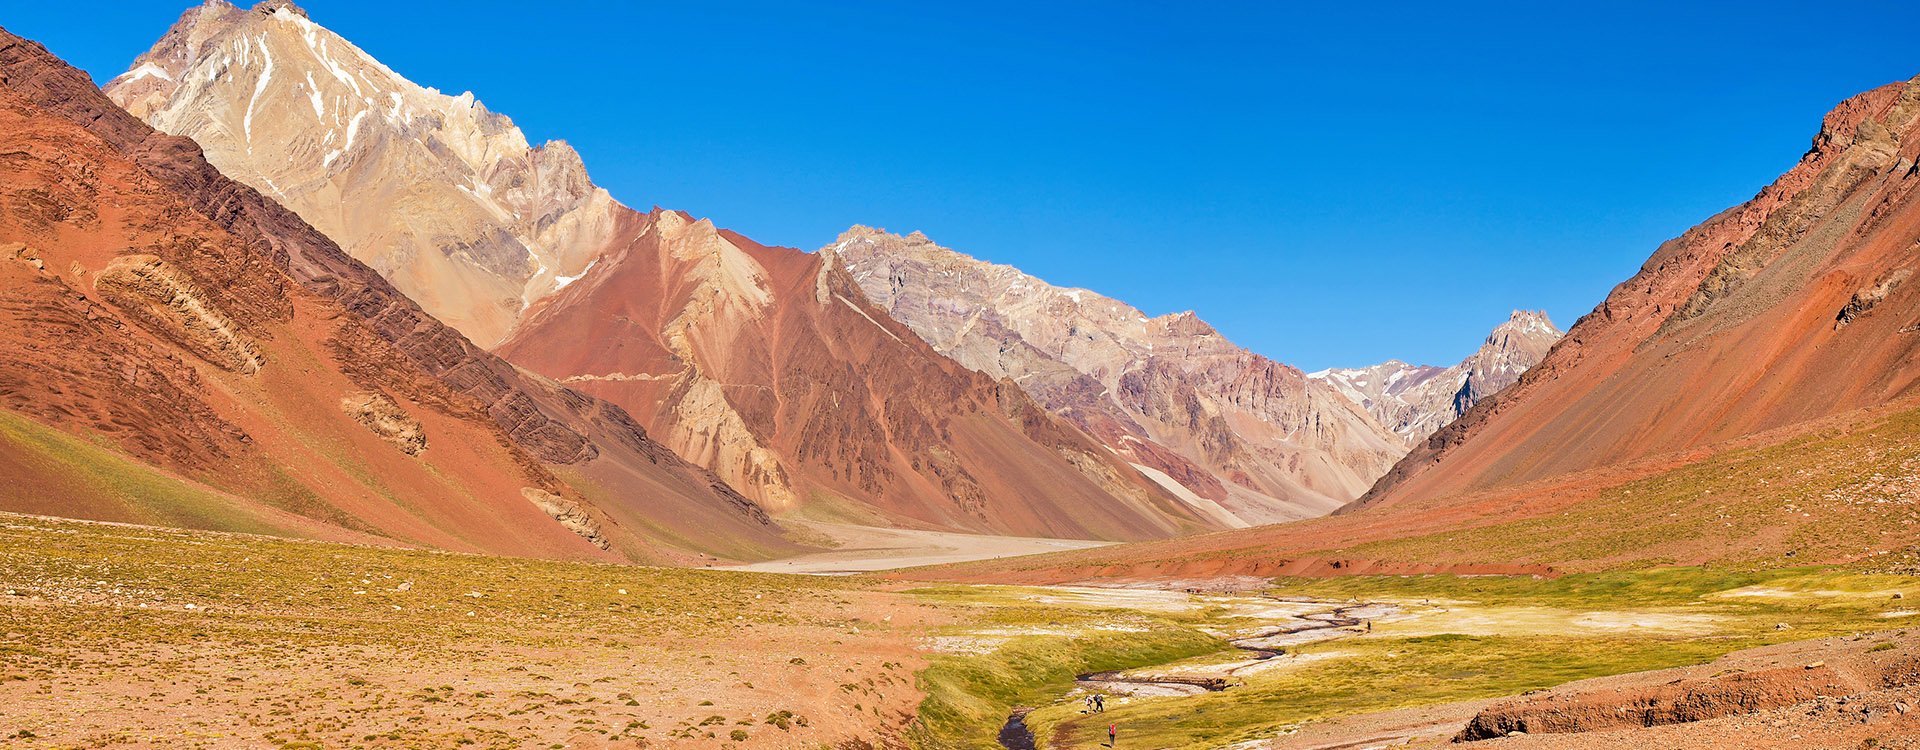 Panoramic view of mountain valley in the Andes with hikers trekking, Argentina, South America